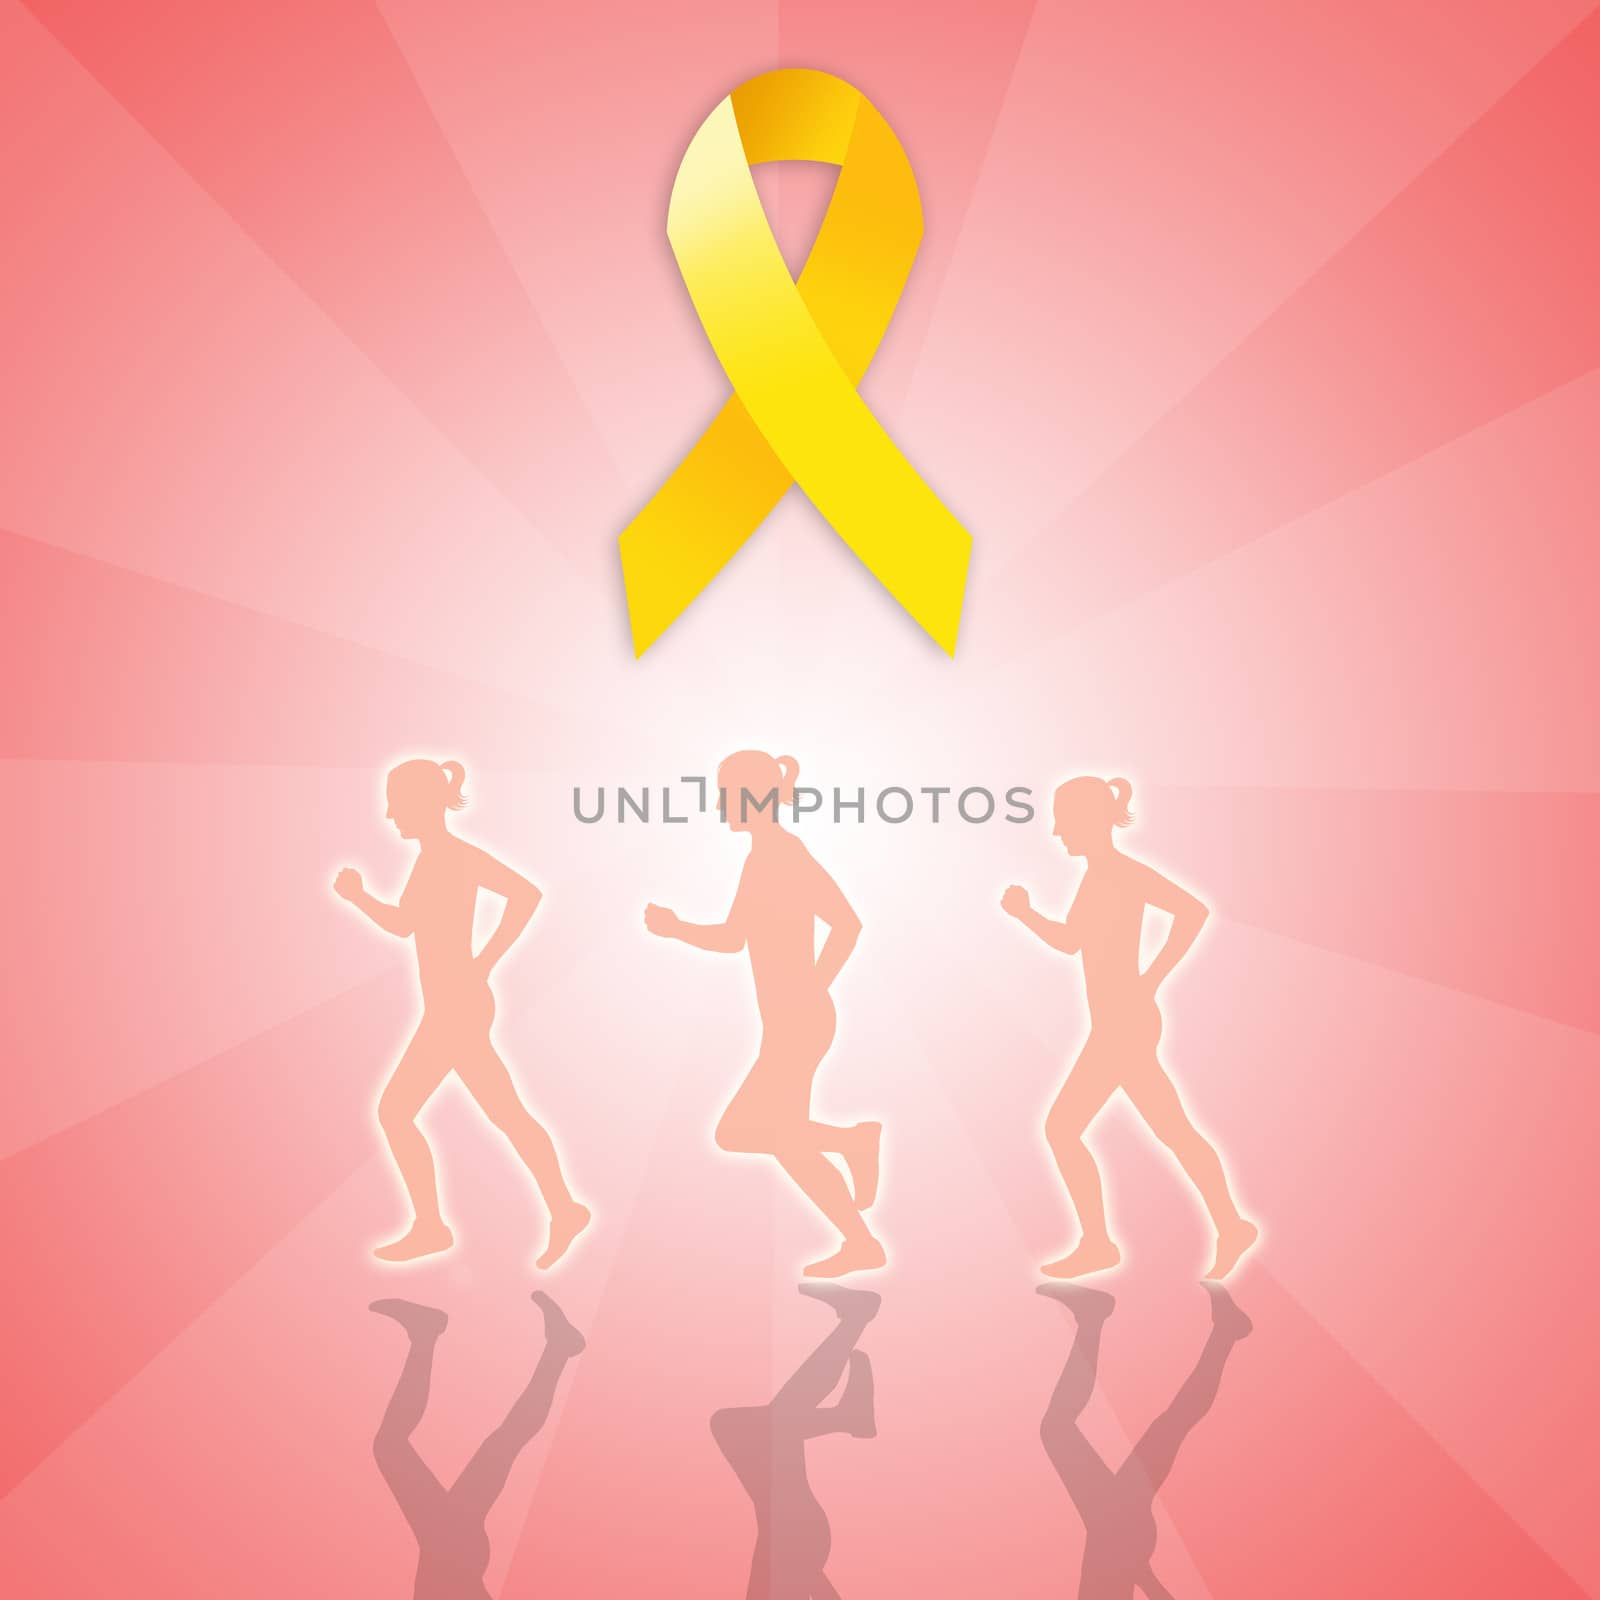 March for Endometriosis with yellow ribbon on pink background